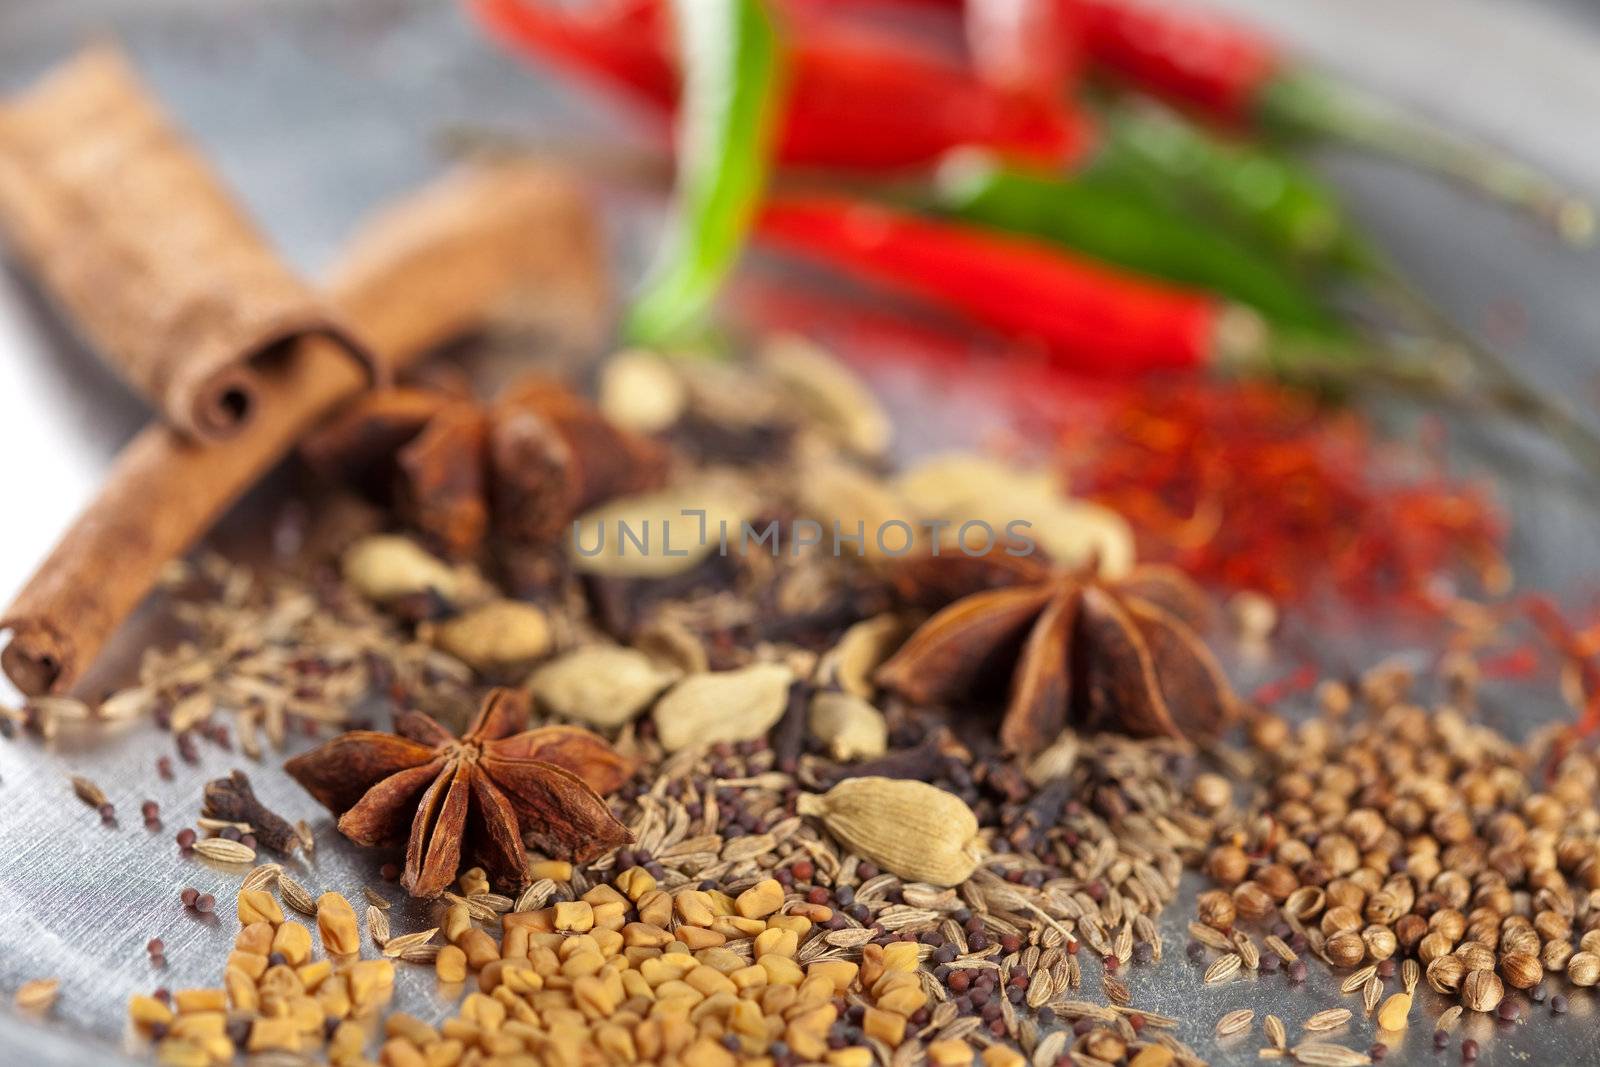 Dried spices typically used in Indian cooking such as curries